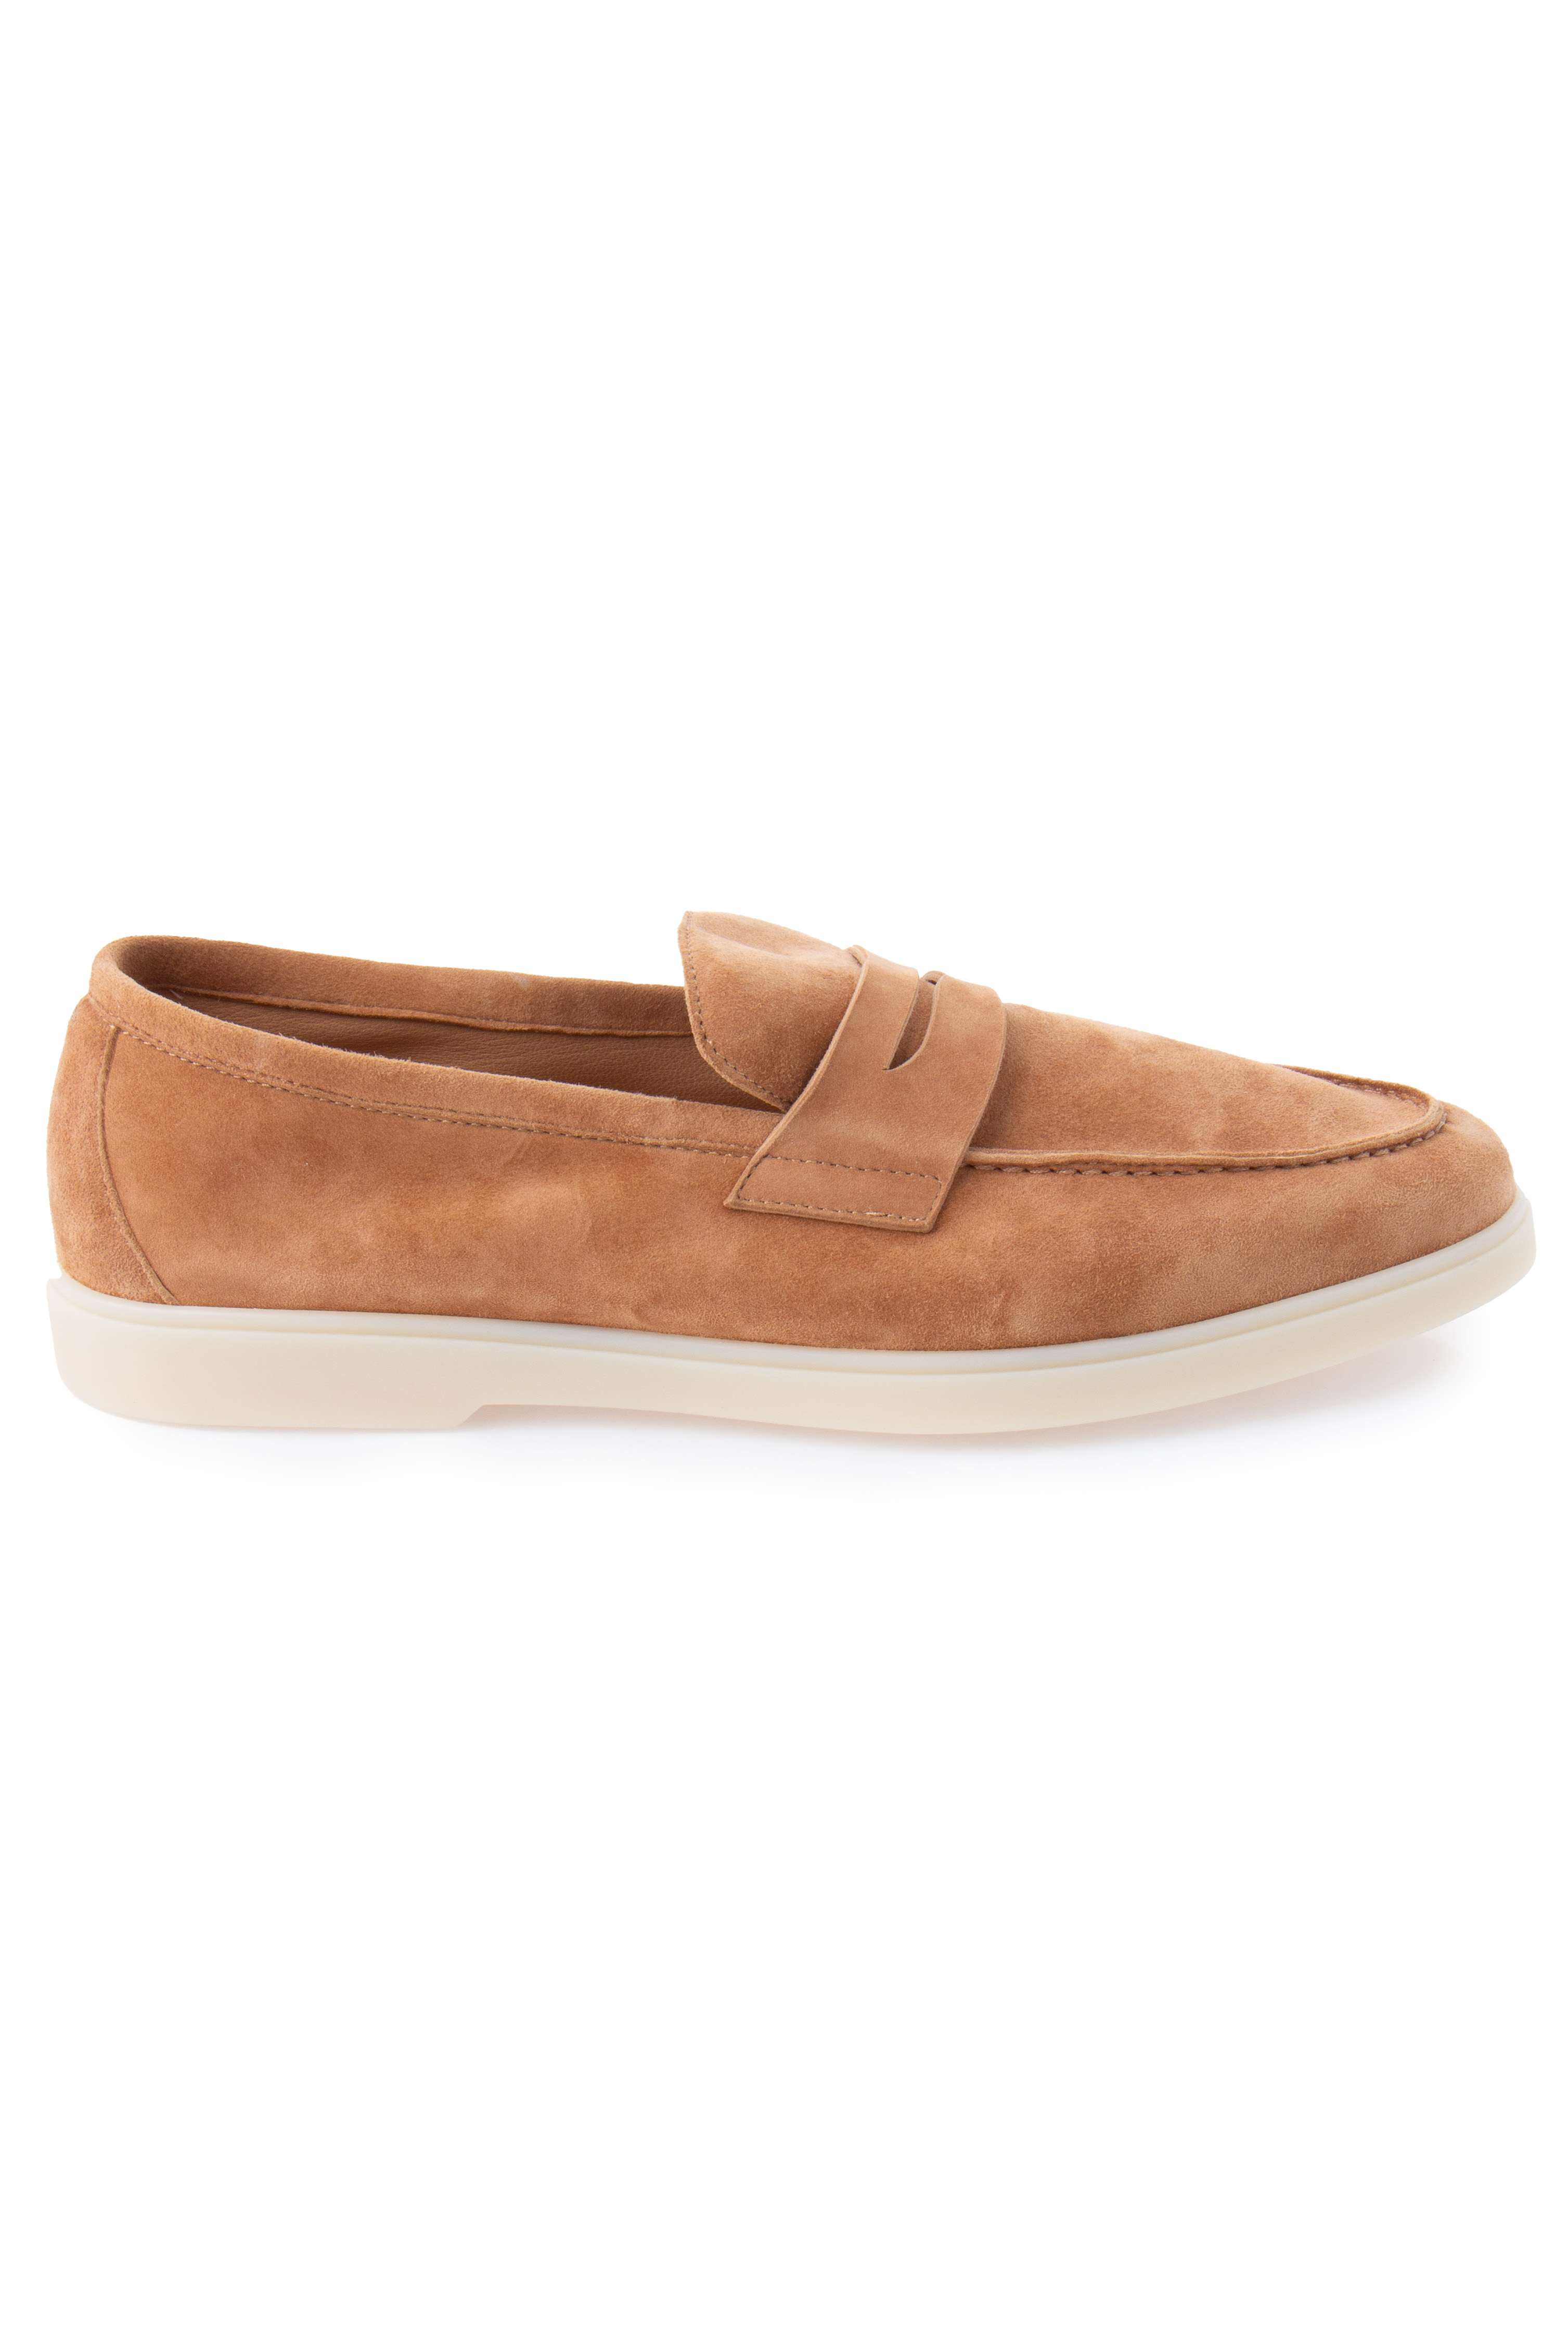 FABIANO RICCI Suede Loafers | Slipper | Lace-up Shoes & Slippers ...